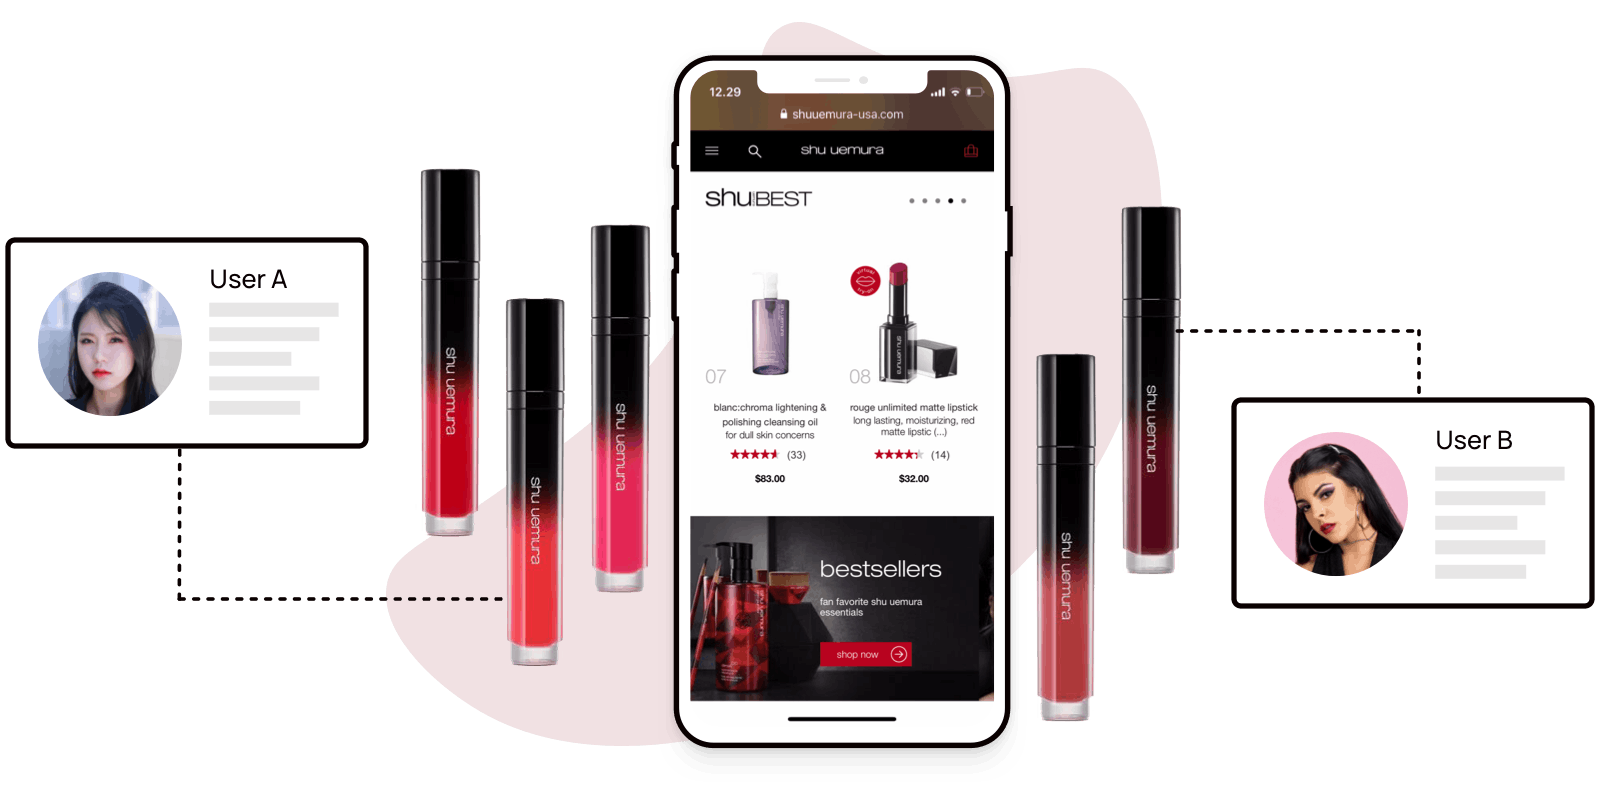 A mobile phone and beauty products linked to imaginary cosmetics shopper preference profiles by Rosetta AI.